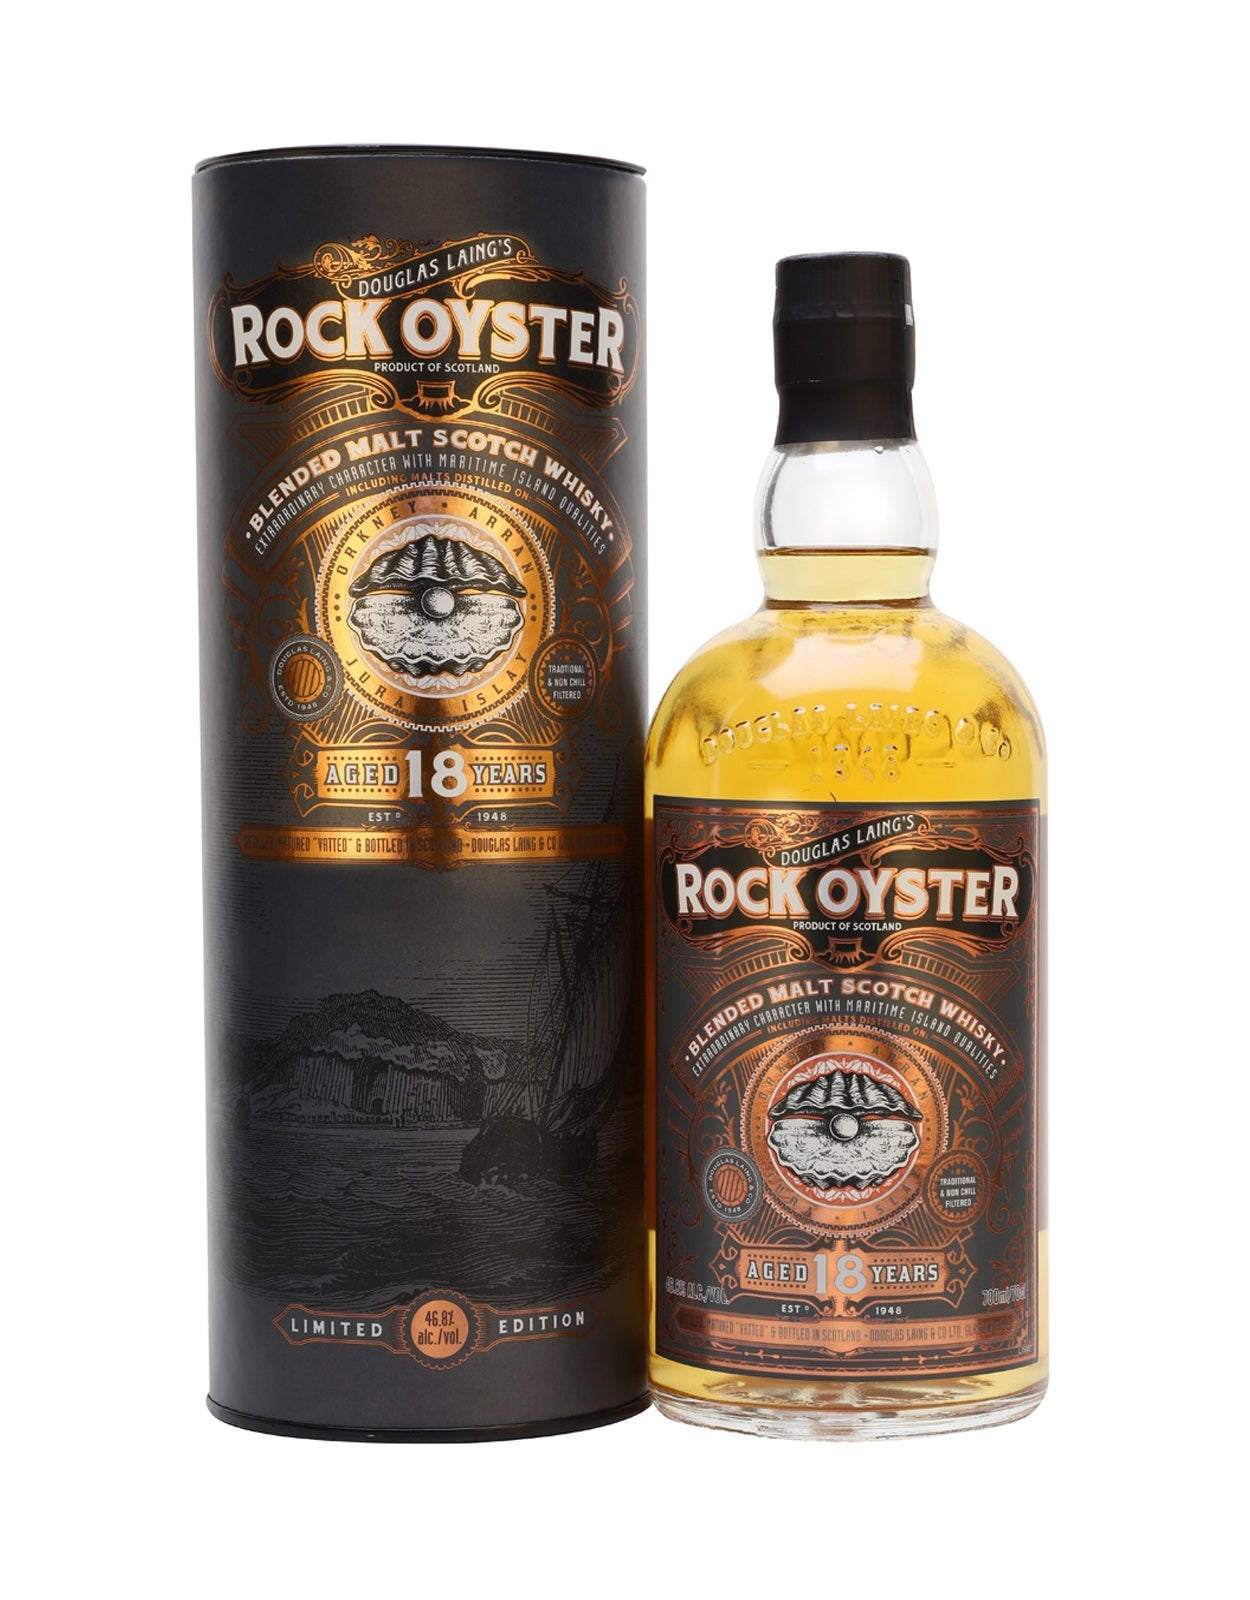 Douglas Laing's Rock Oyster 18 Year Old Blended Whisky